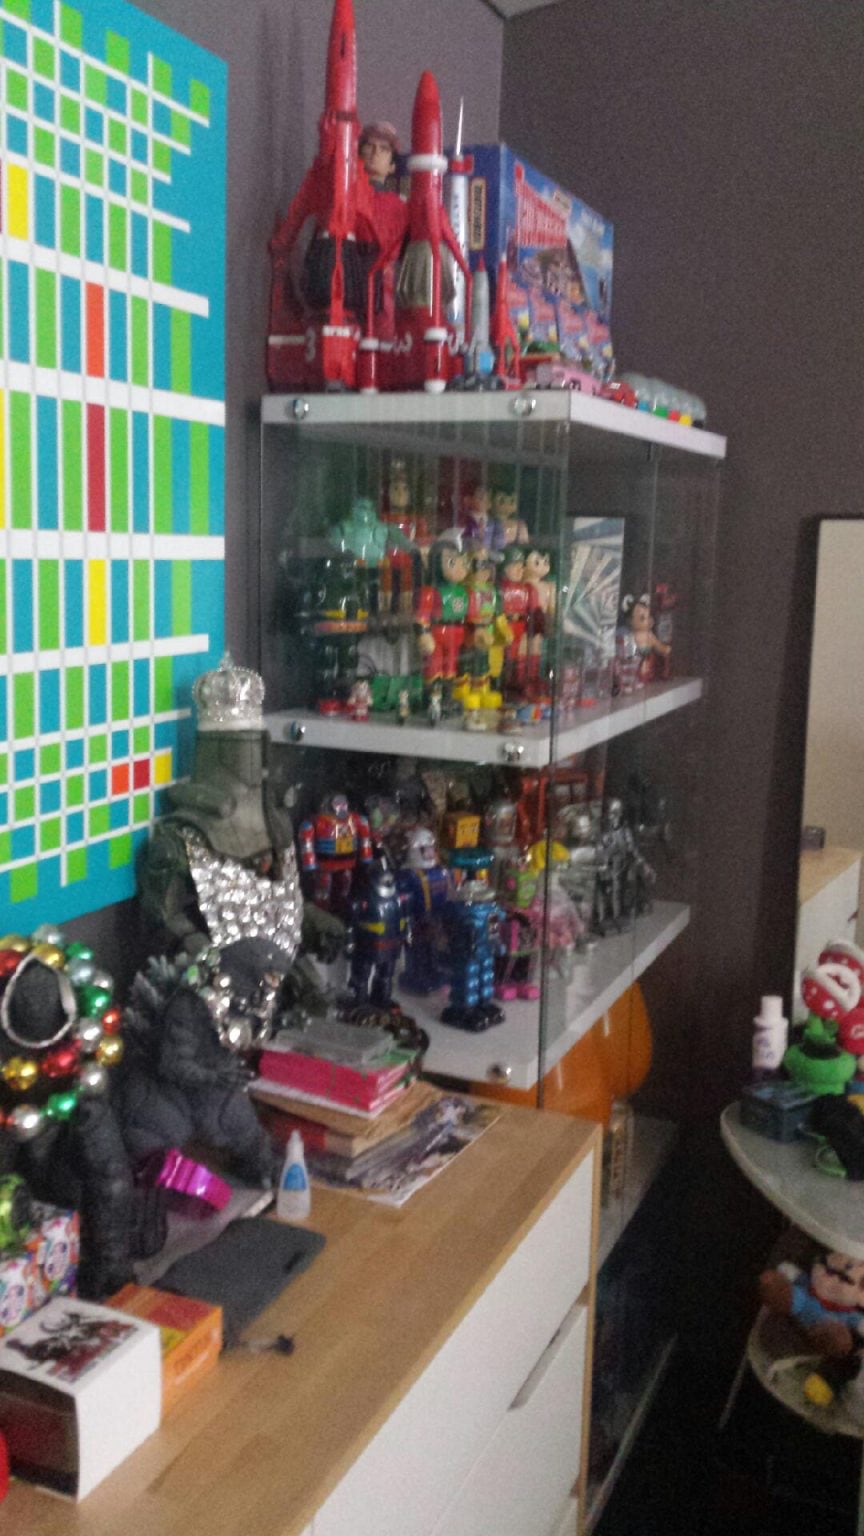 Rod’s toy collection